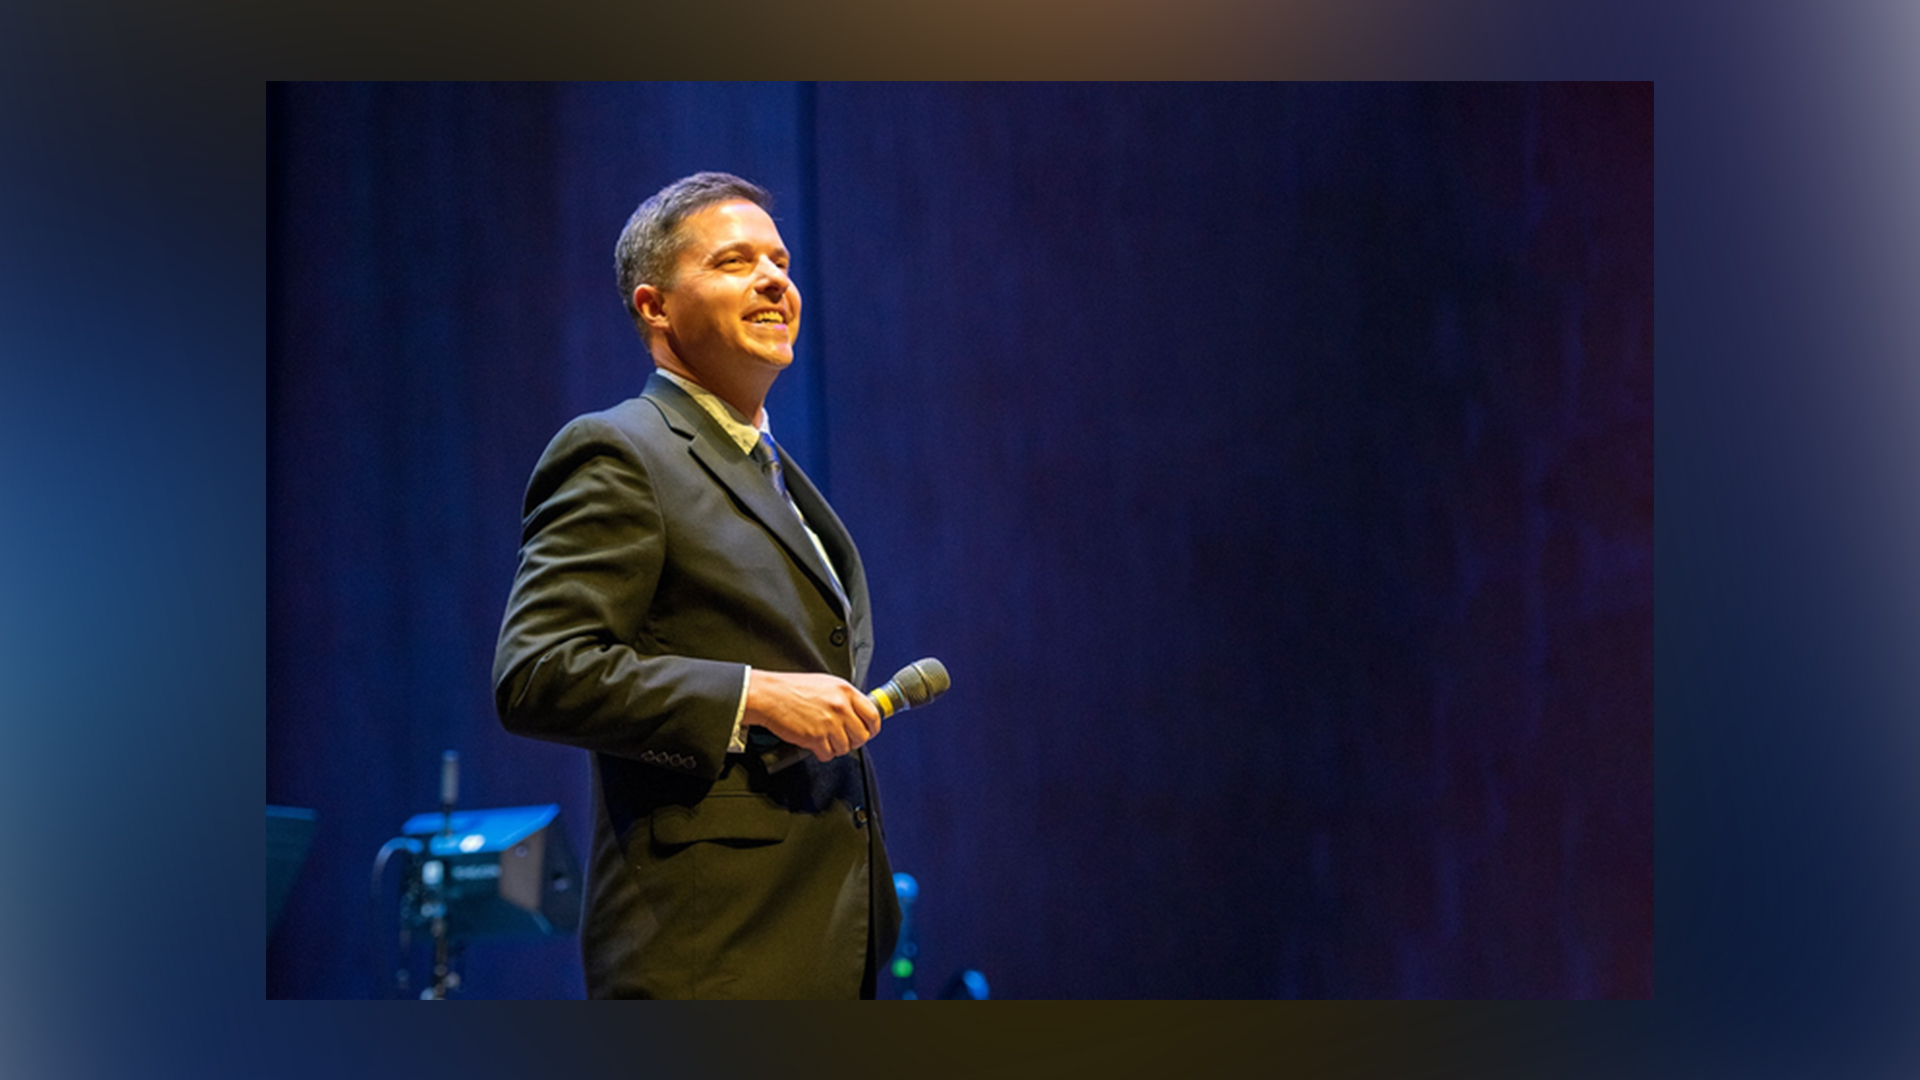 Image of Matt Gibson onstage at the Singletary Center in a black suit against a blue backdrop holding a microphone